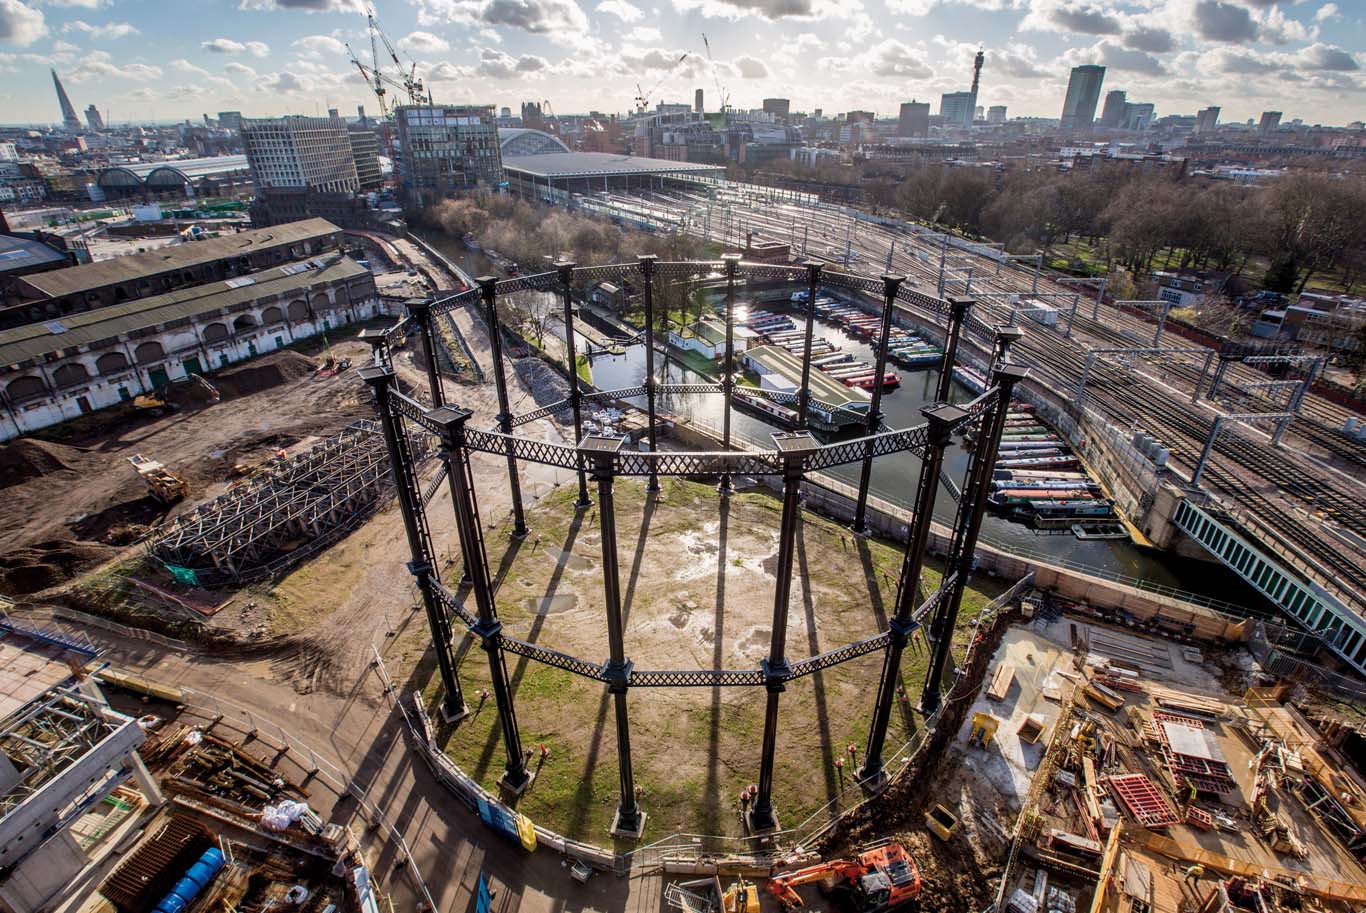 The new Gasholder Park will open here, on the banks of Regent's Canal